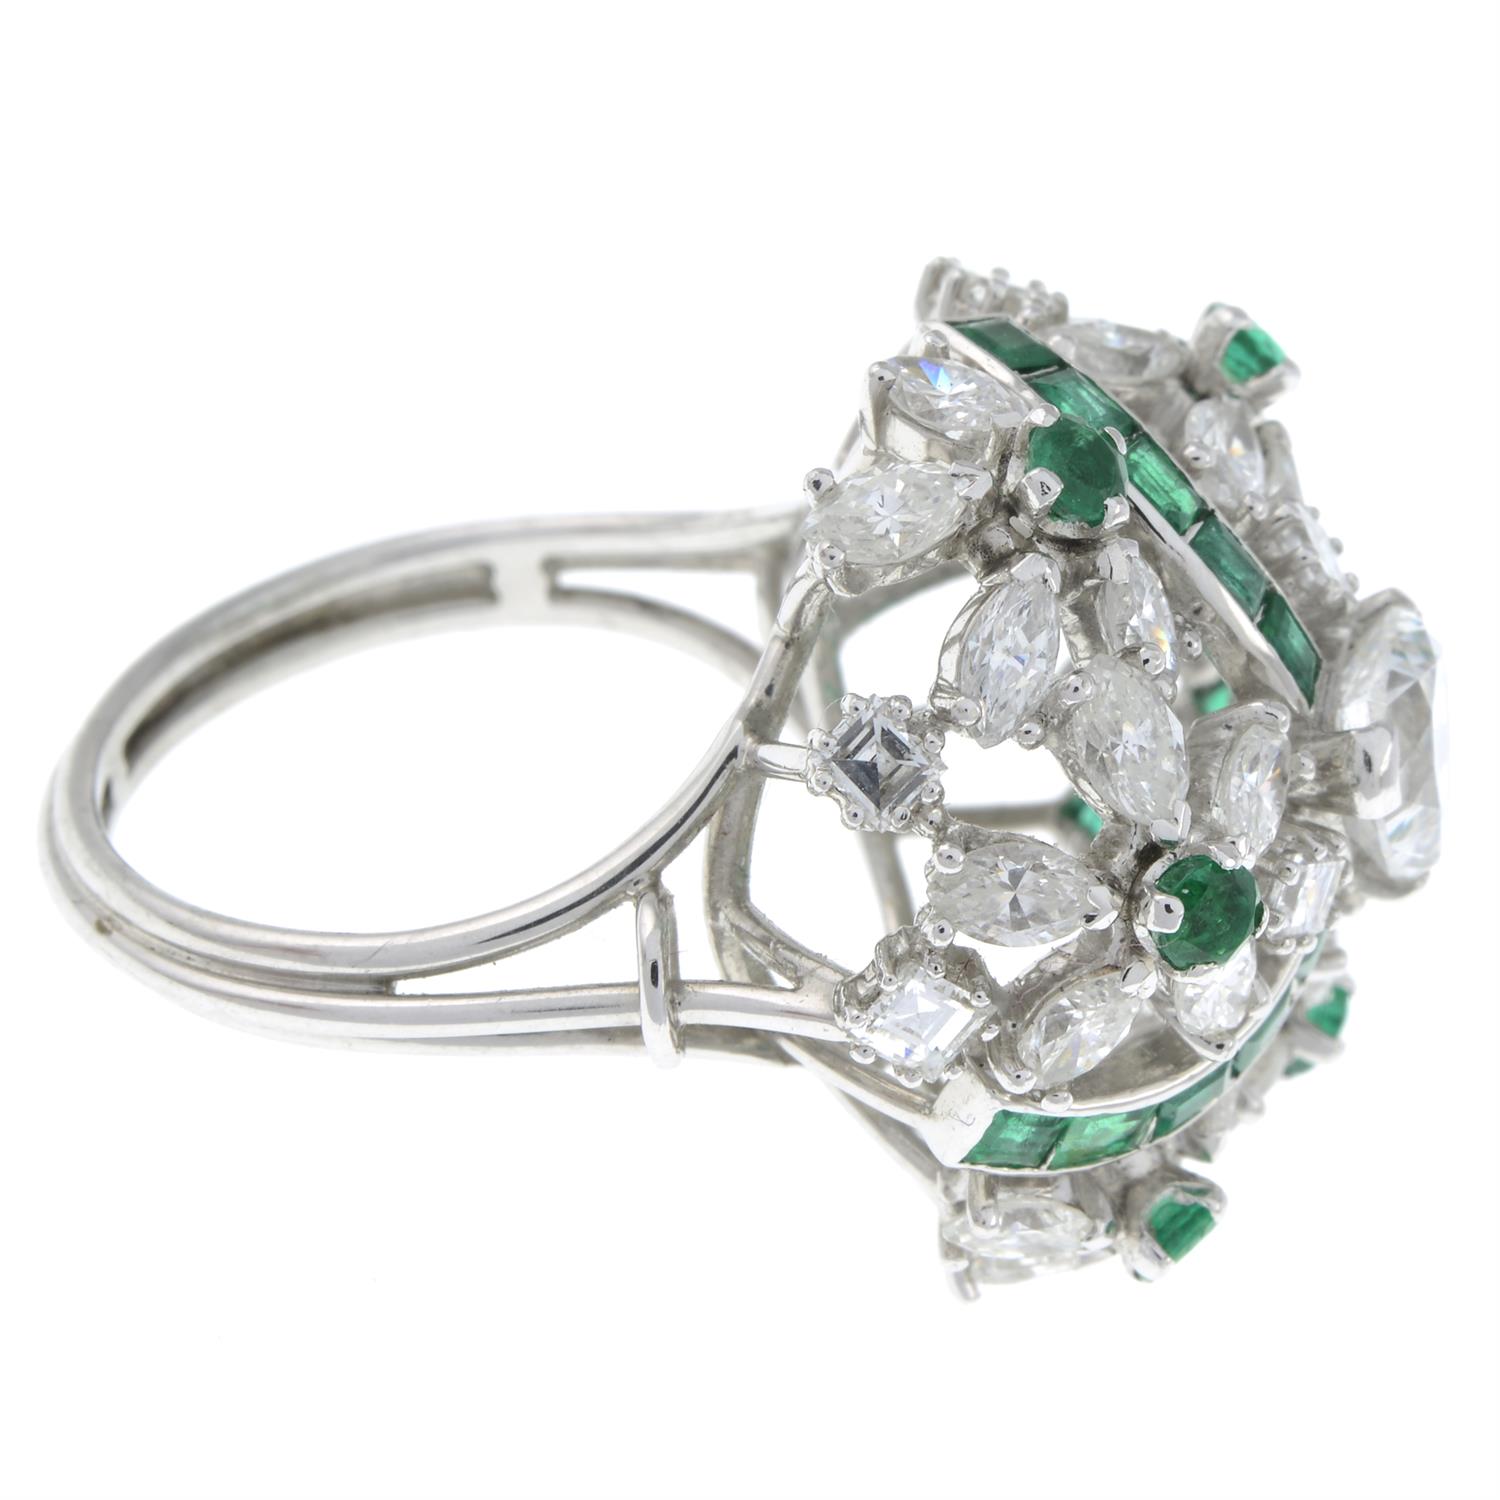 Mid 20th century platinum diamond and emerald floral ring - Image 5 of 6